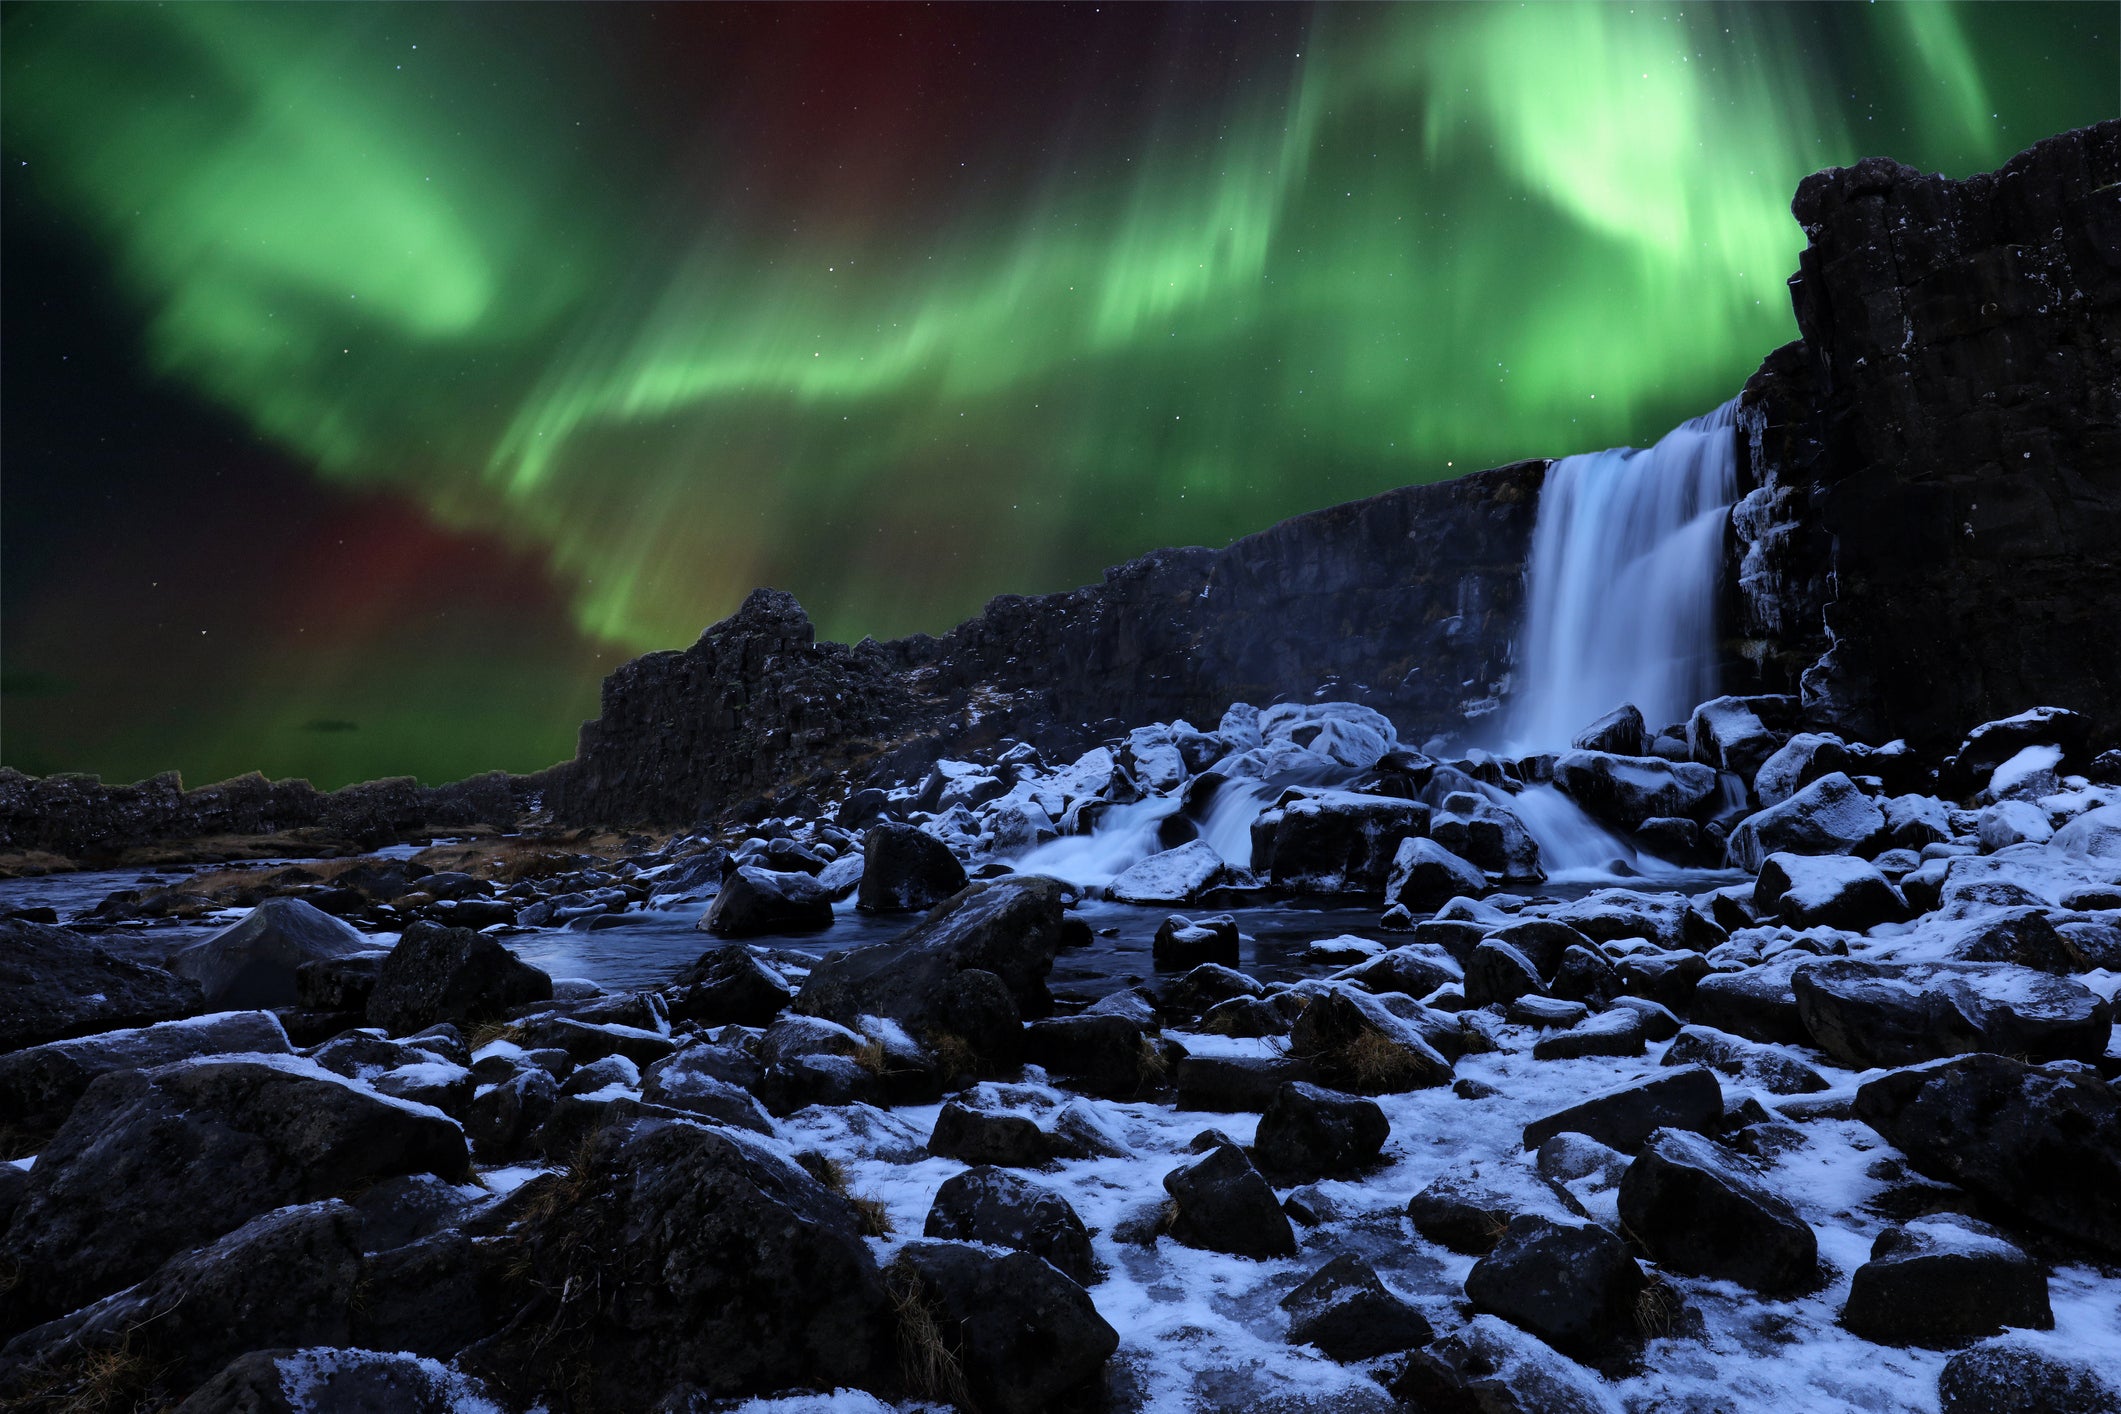 The Aurora Borealis lights up the sky above a waterfall in Thingvellir National Park